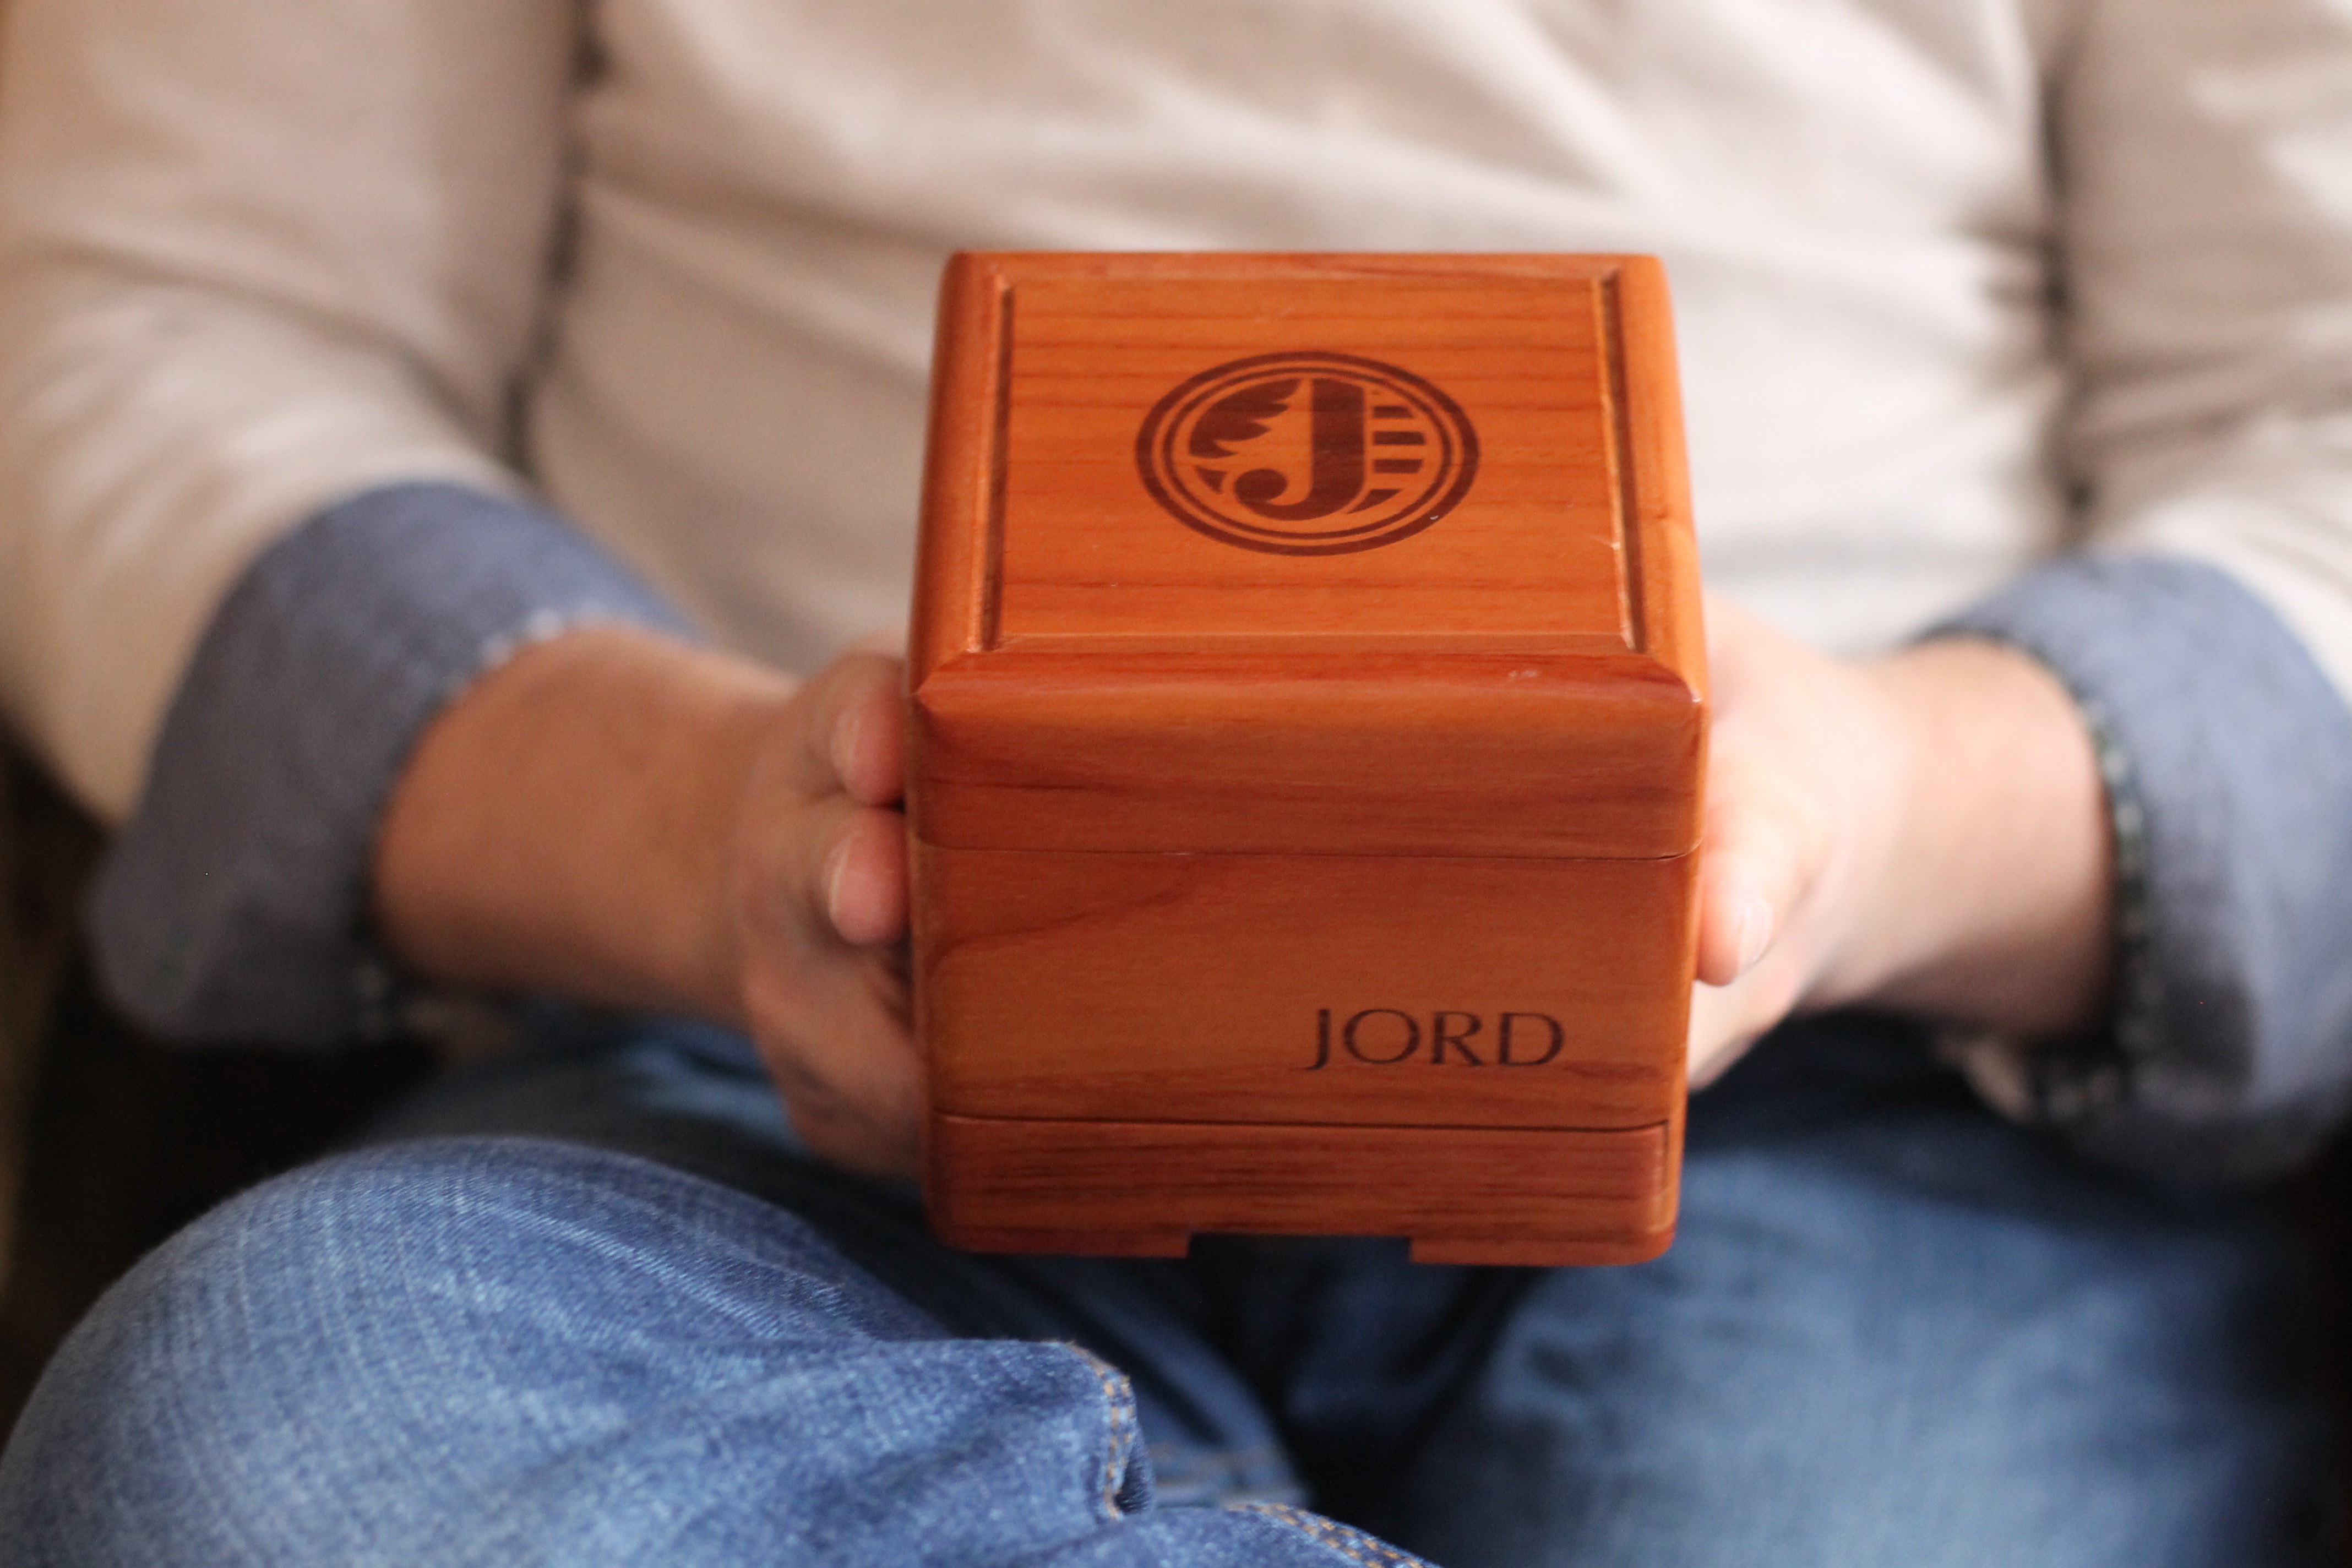 JORD Wooden Watch Dad-to-be Gift + Giveaway!